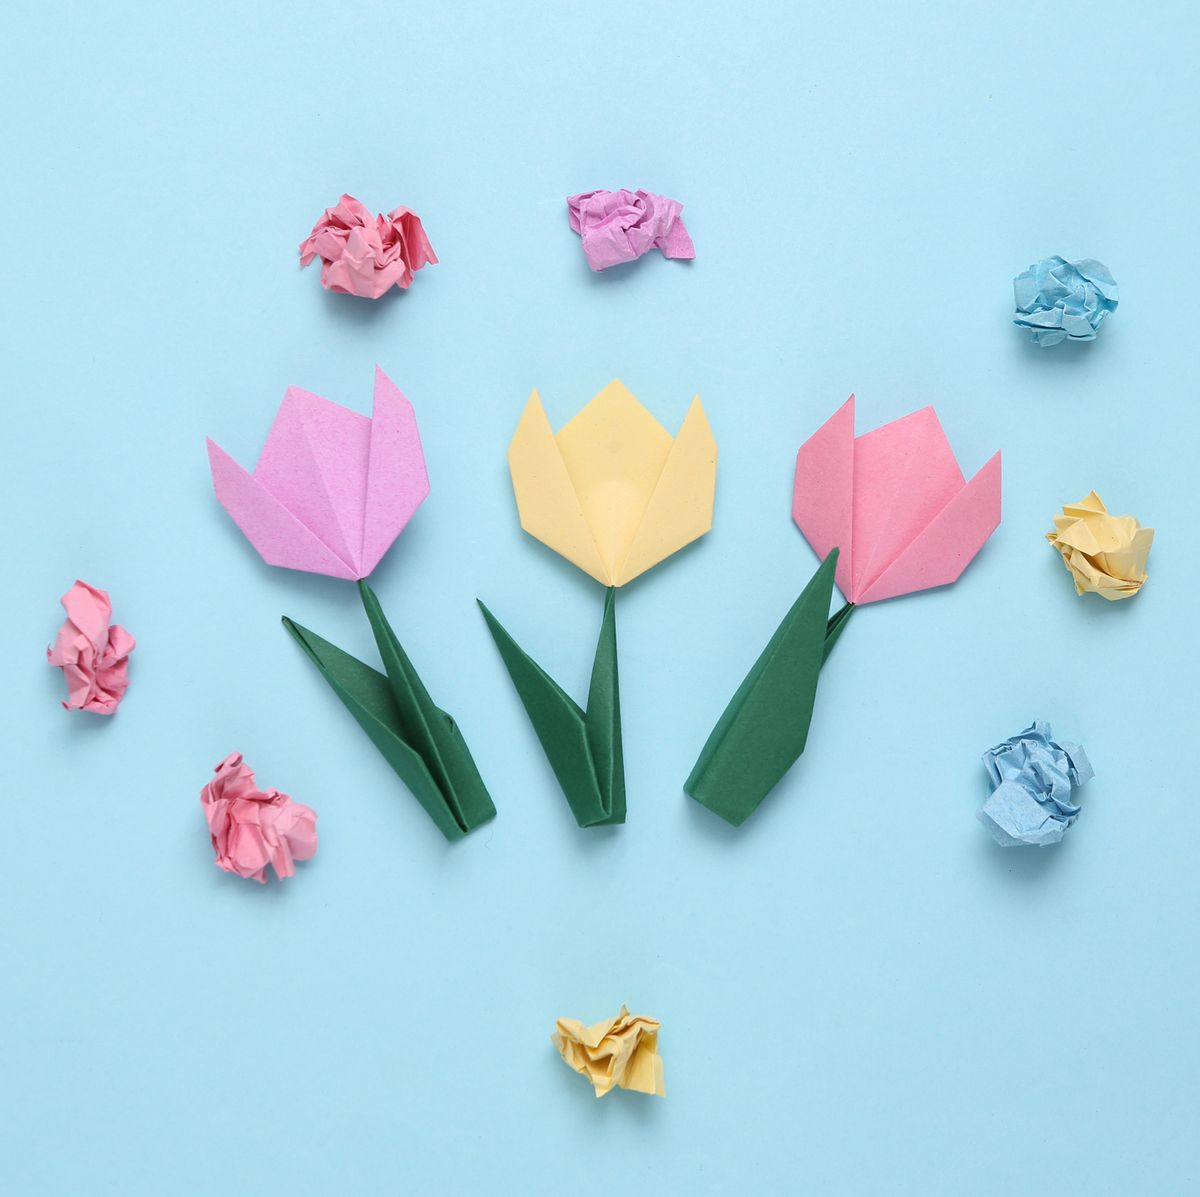 How To Make Folded Flowers